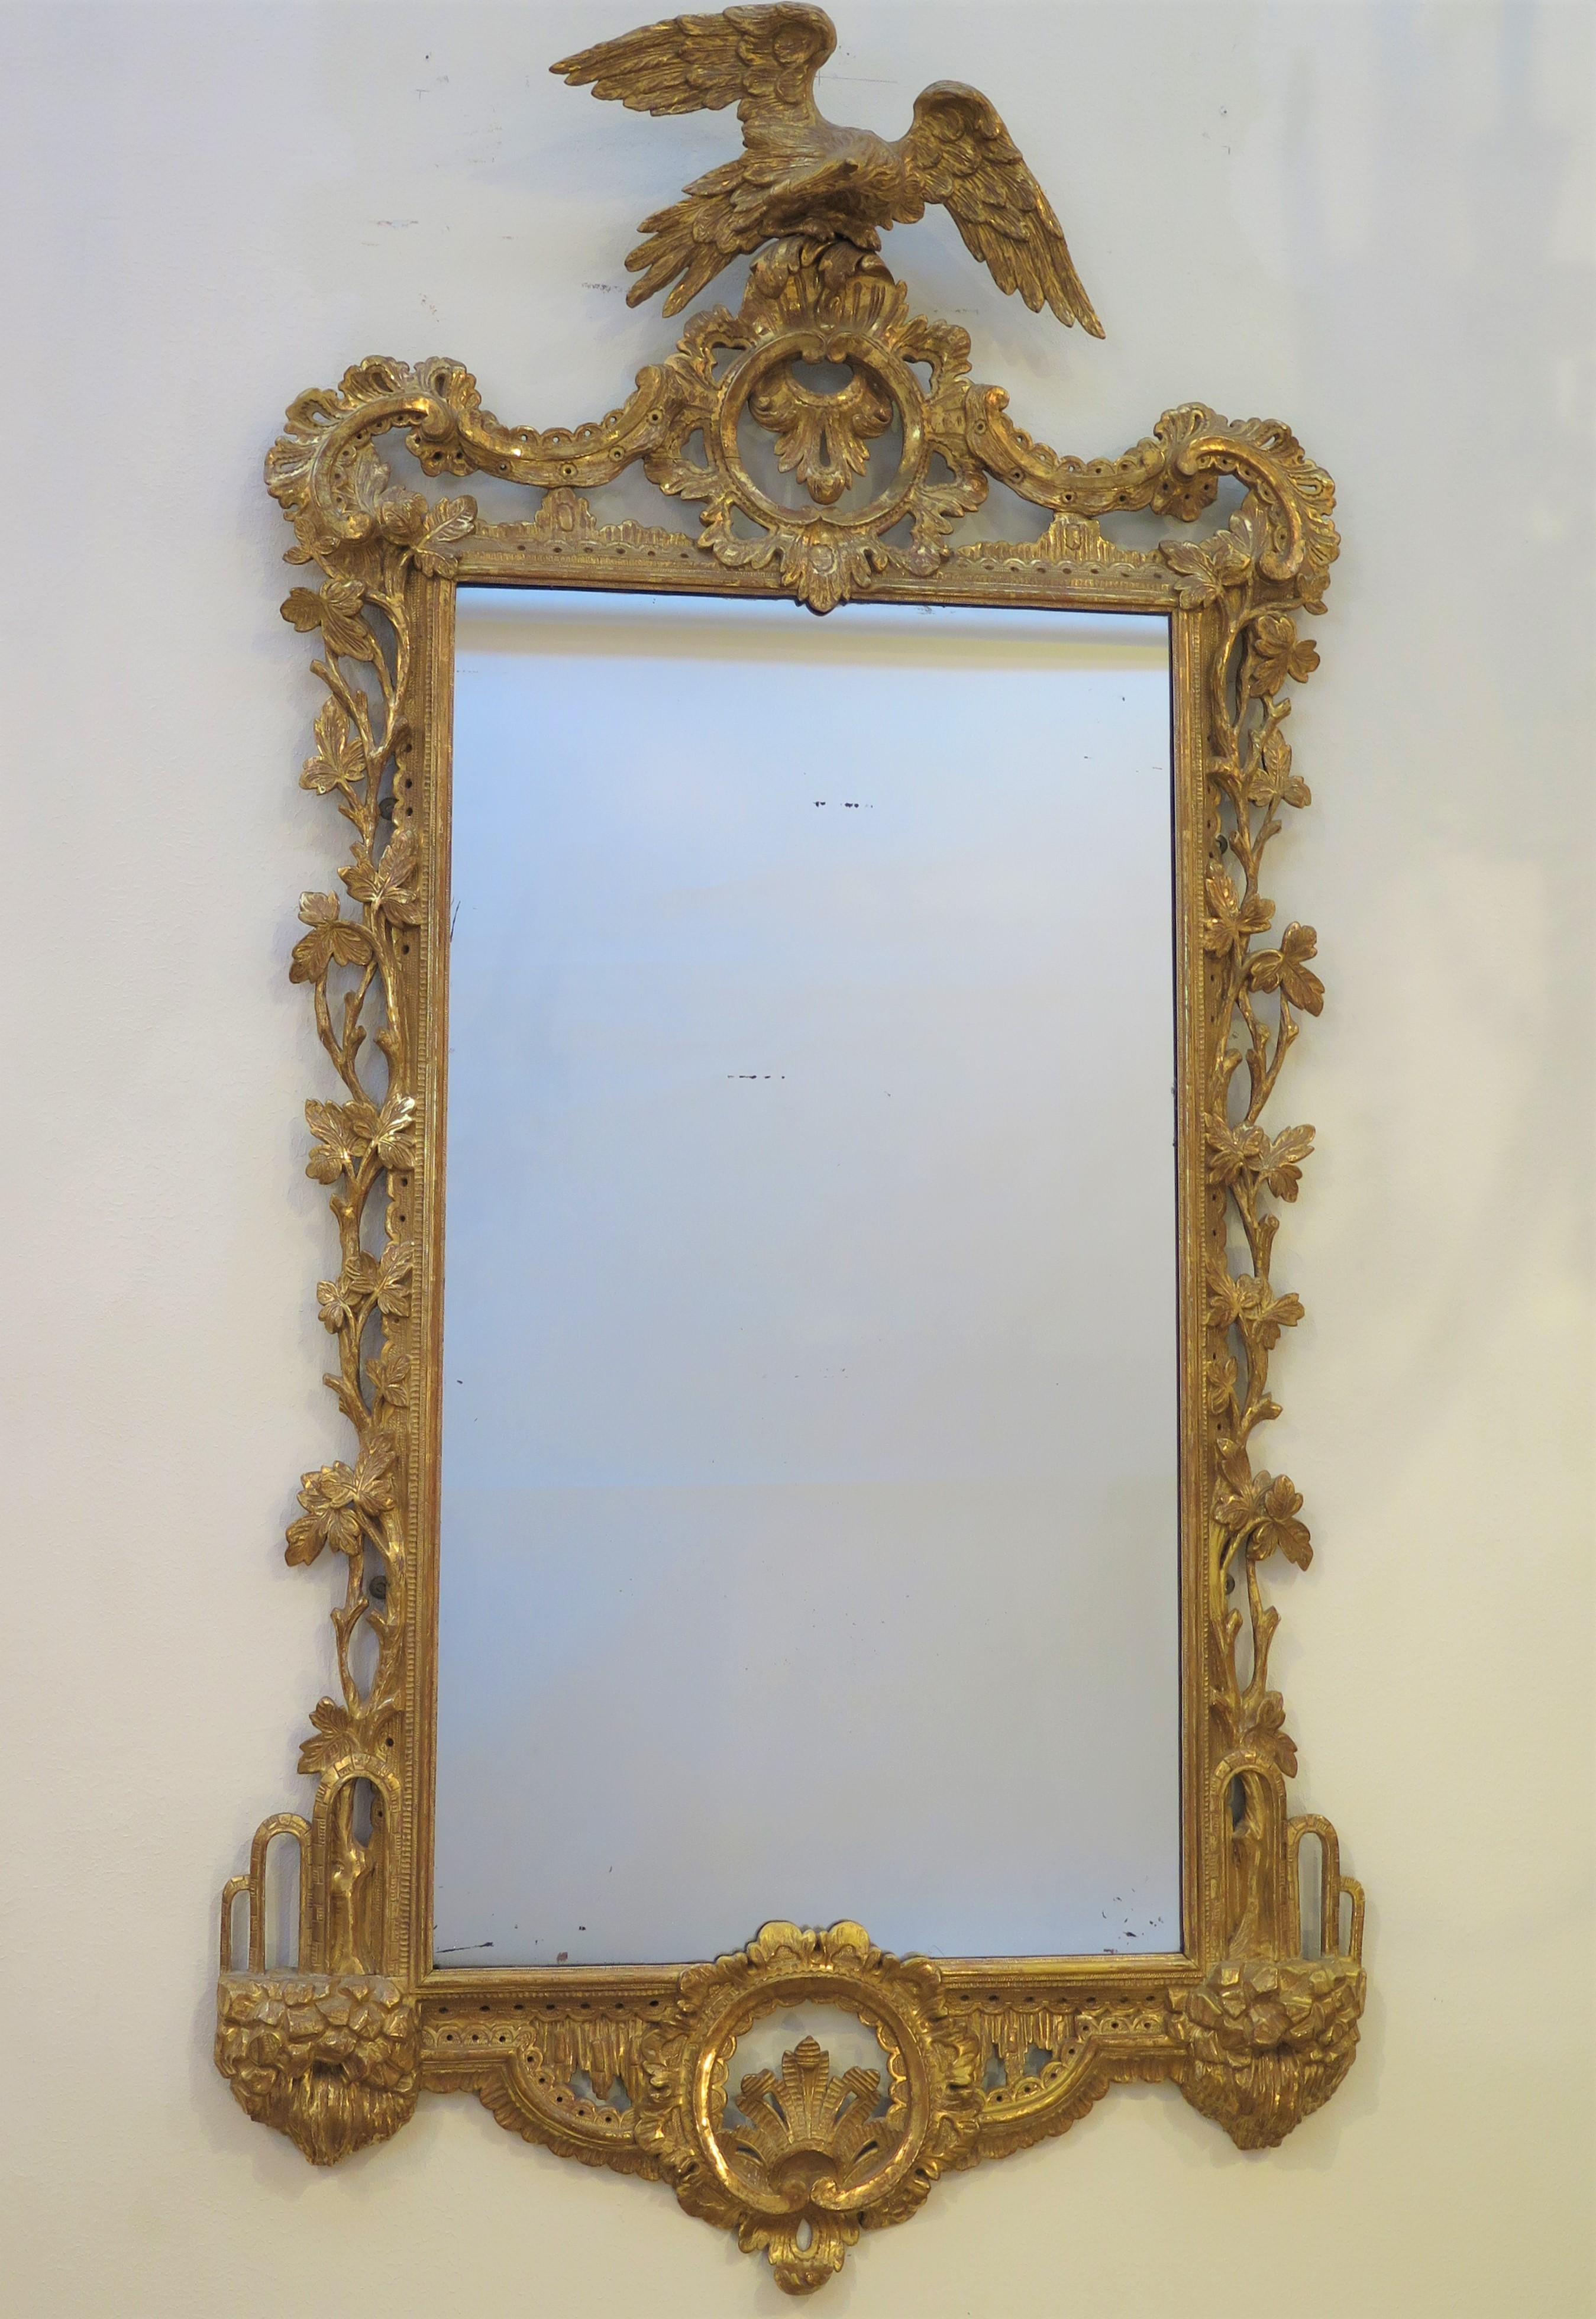 A Fine George II Carved Giltwood Mirror with Phoenix Crest For Sale 6